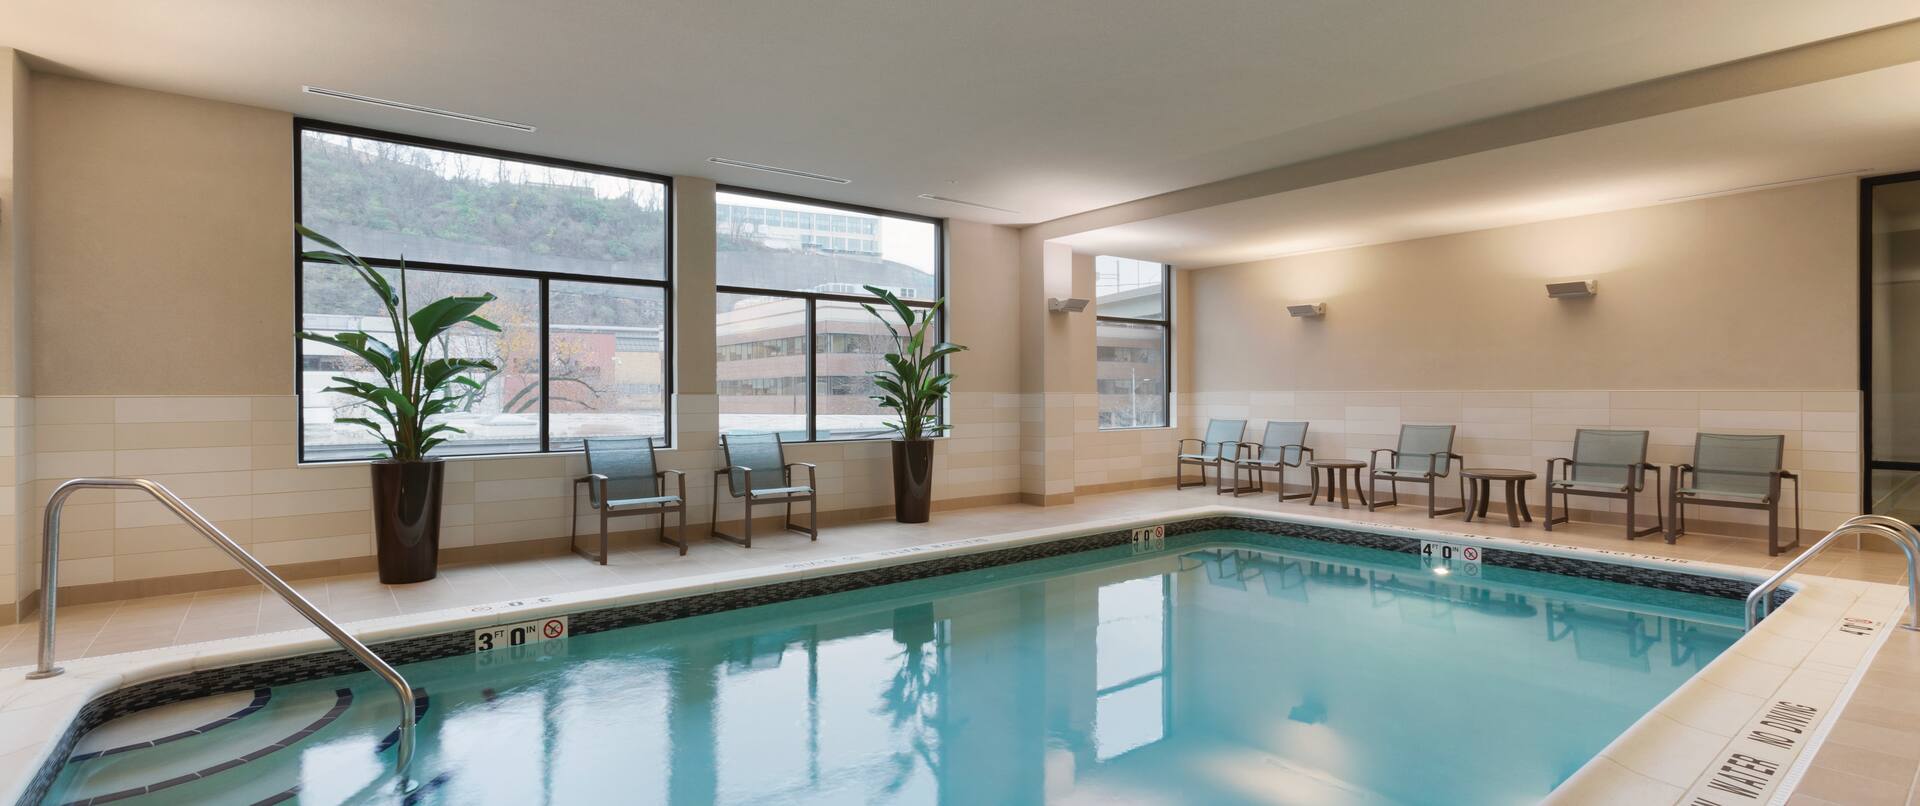 Indoor Pool with lounge chairs